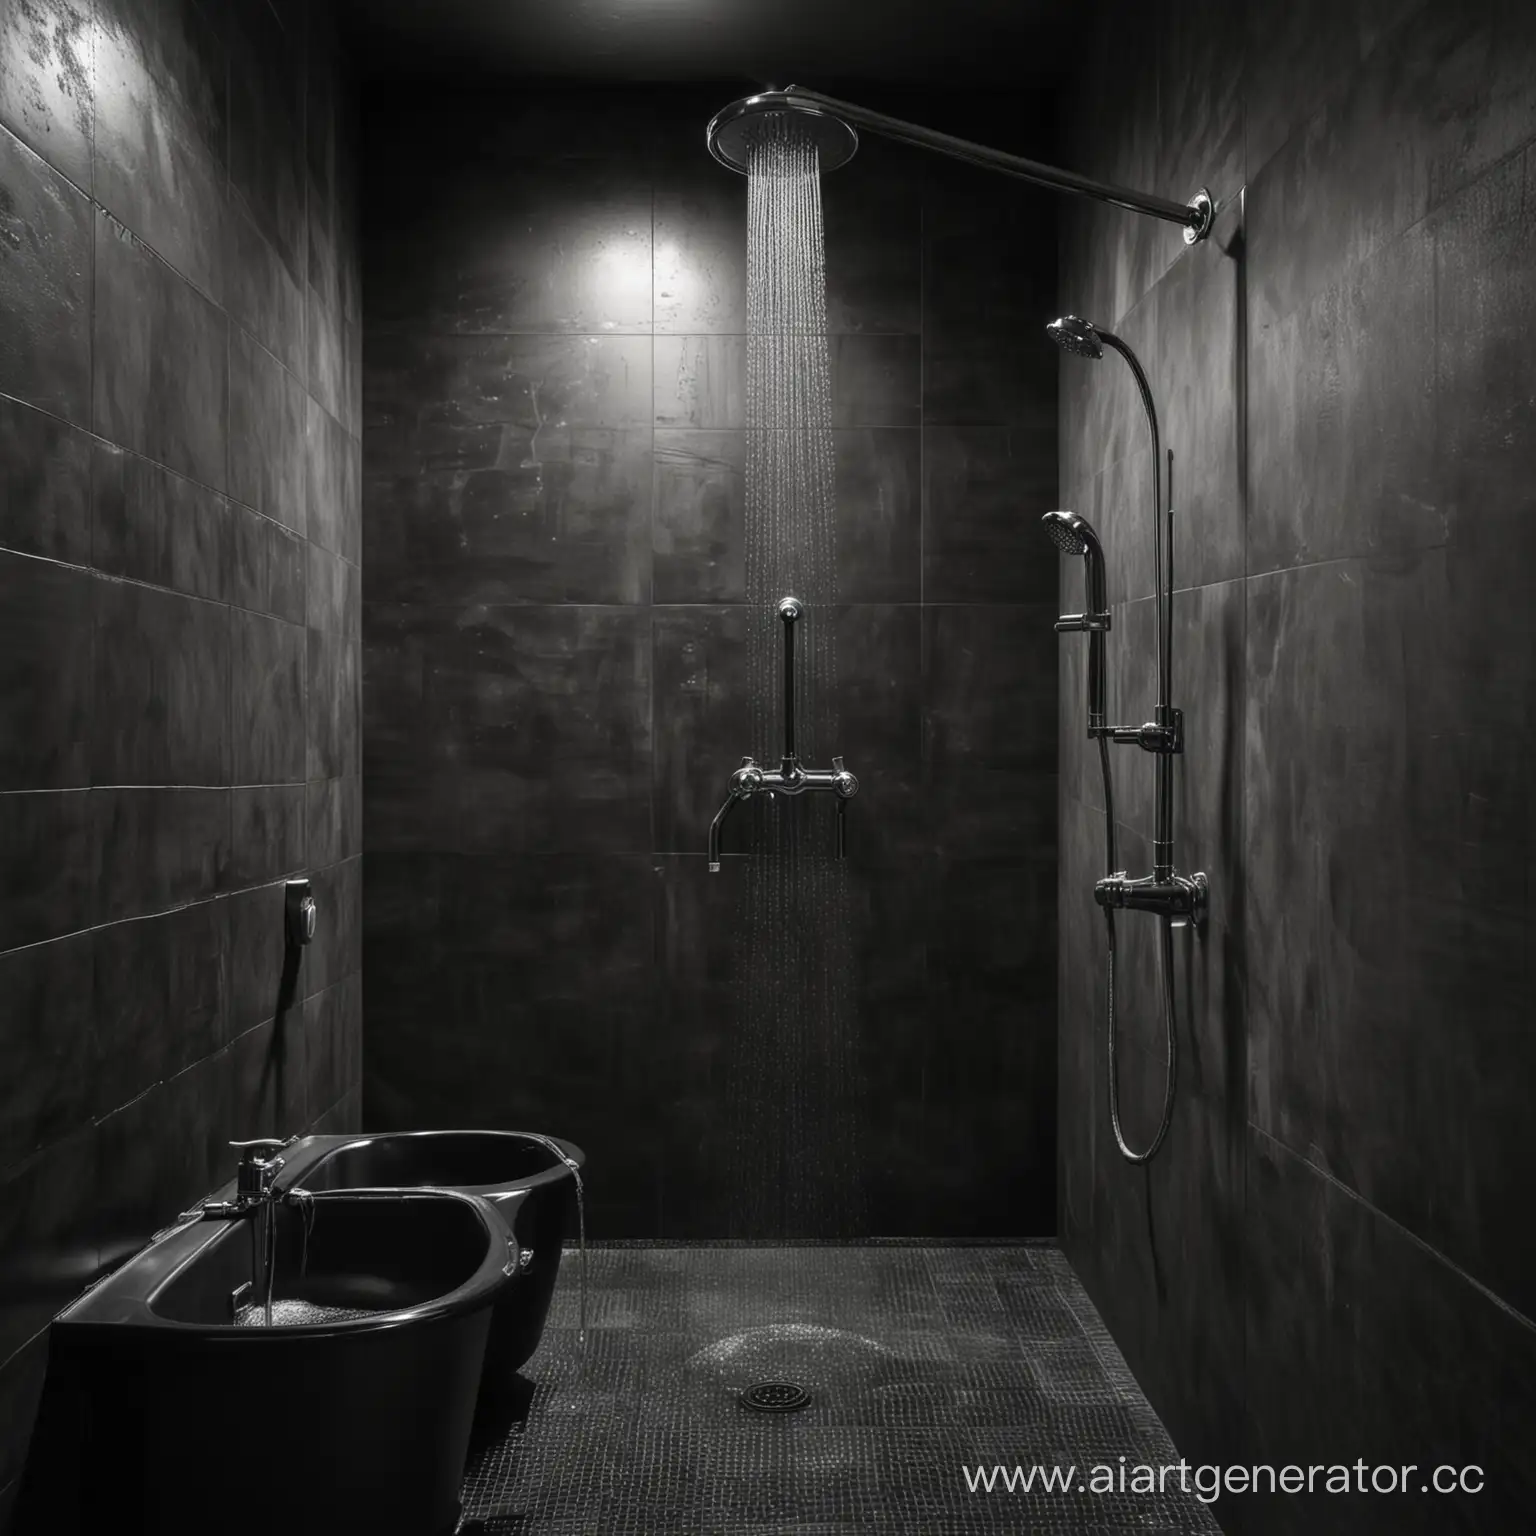 Refreshing-Shower-with-Watering-Can-and-Mixer-in-a-Dark-Bathroom